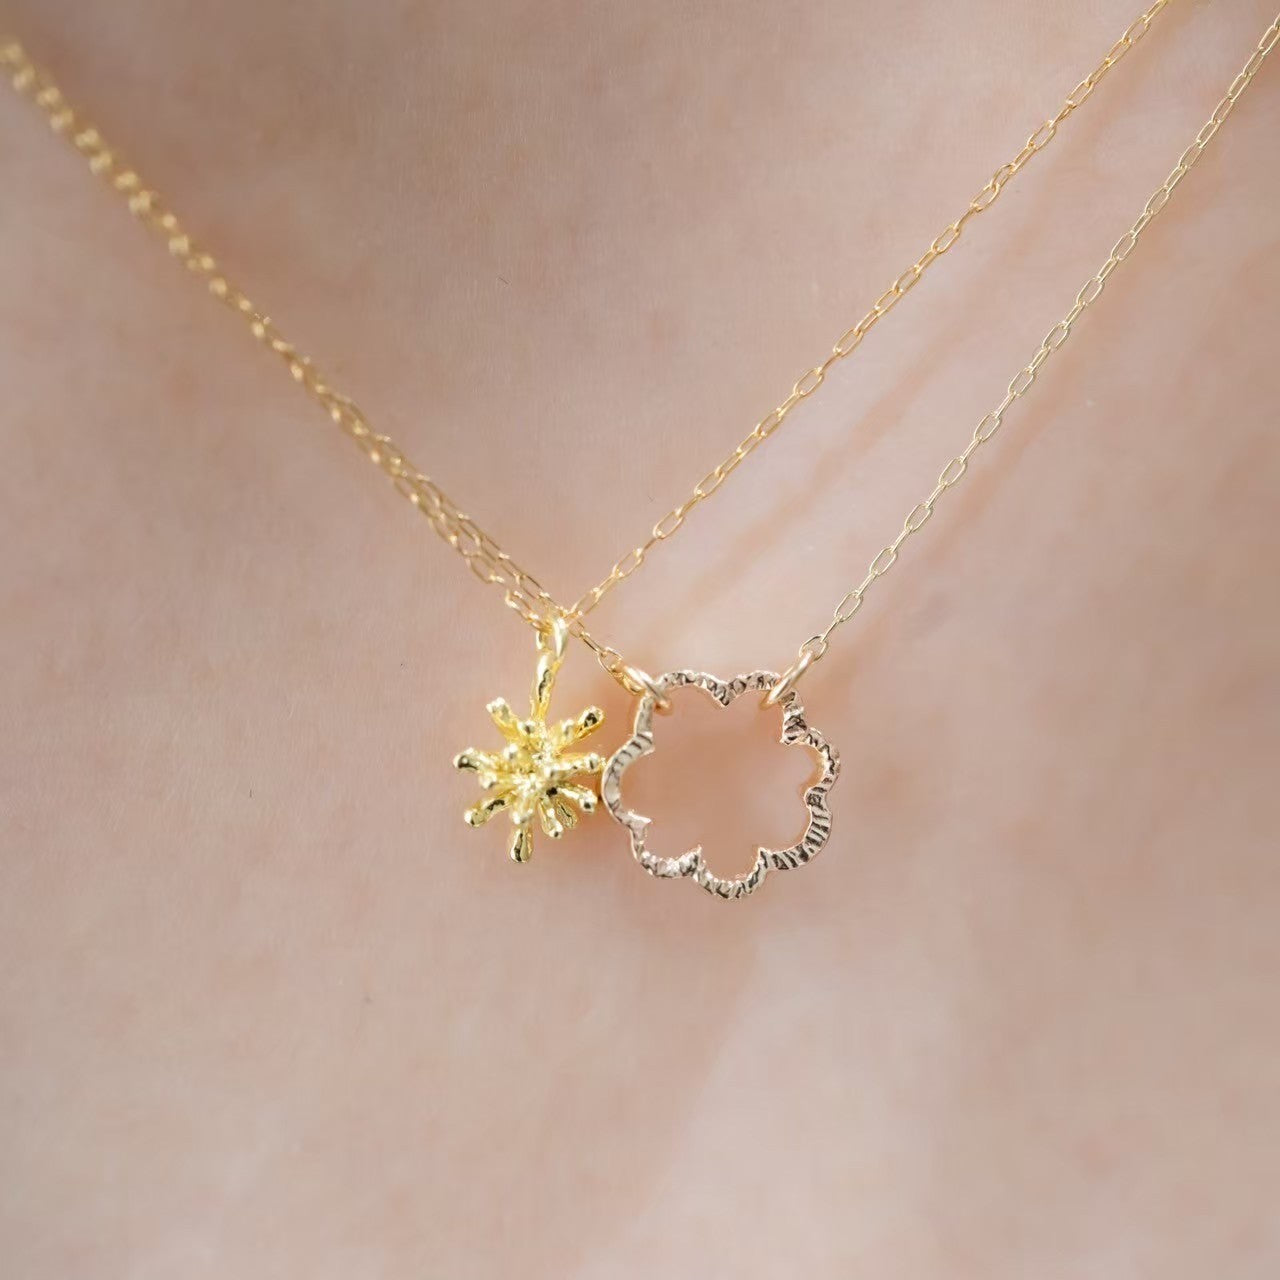 Stardust Necklace/K18 Yellow Gold